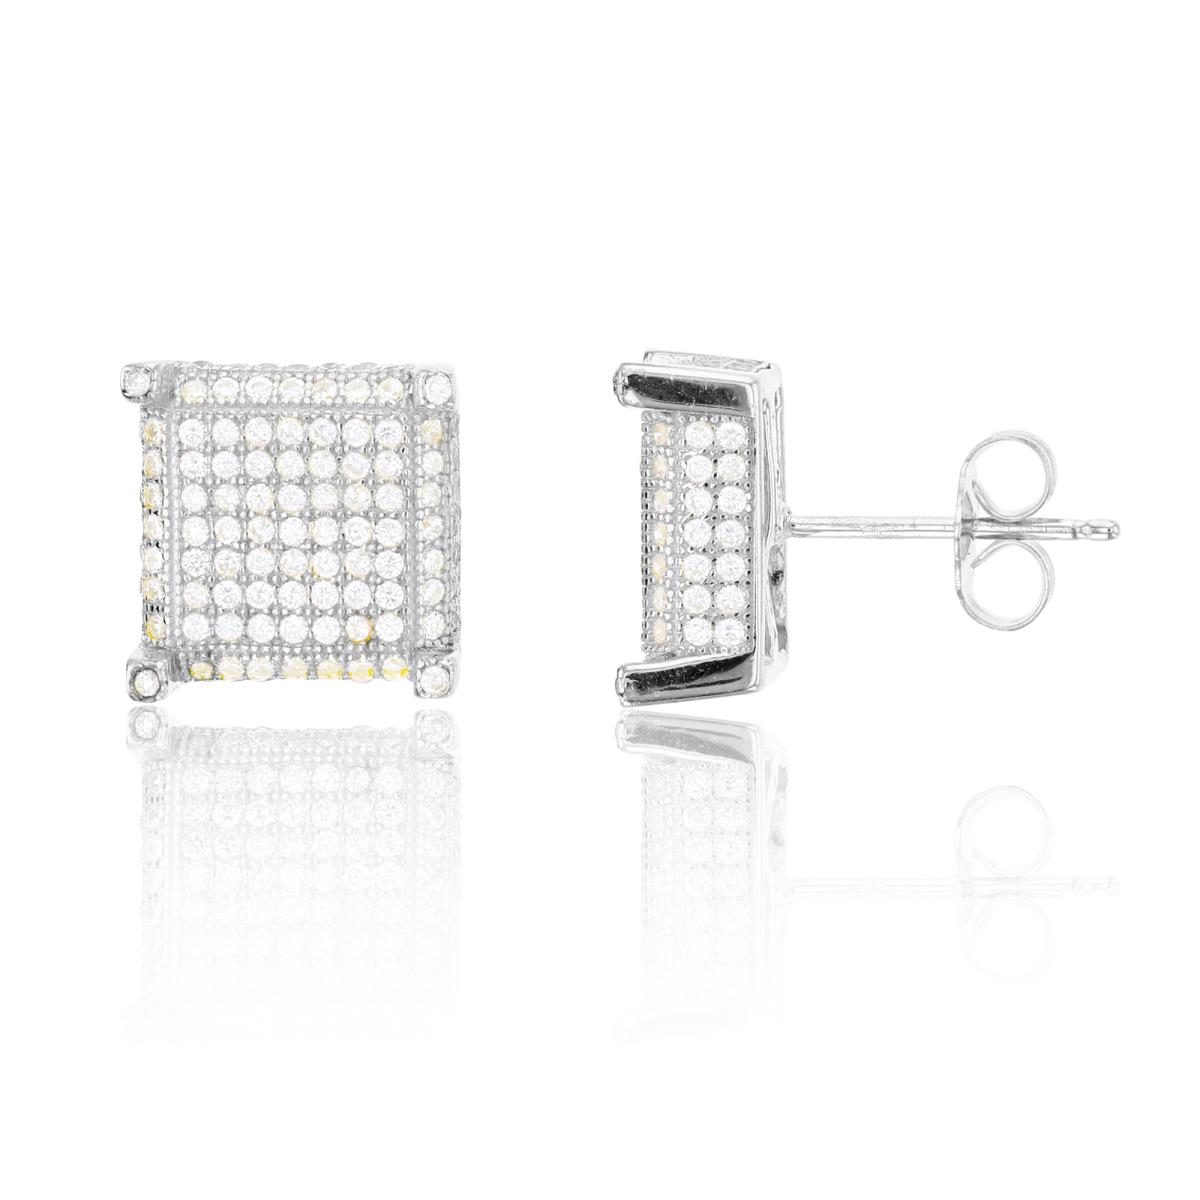 Sterling Silver 12x12mm 3D Square Micropave Stud Earring